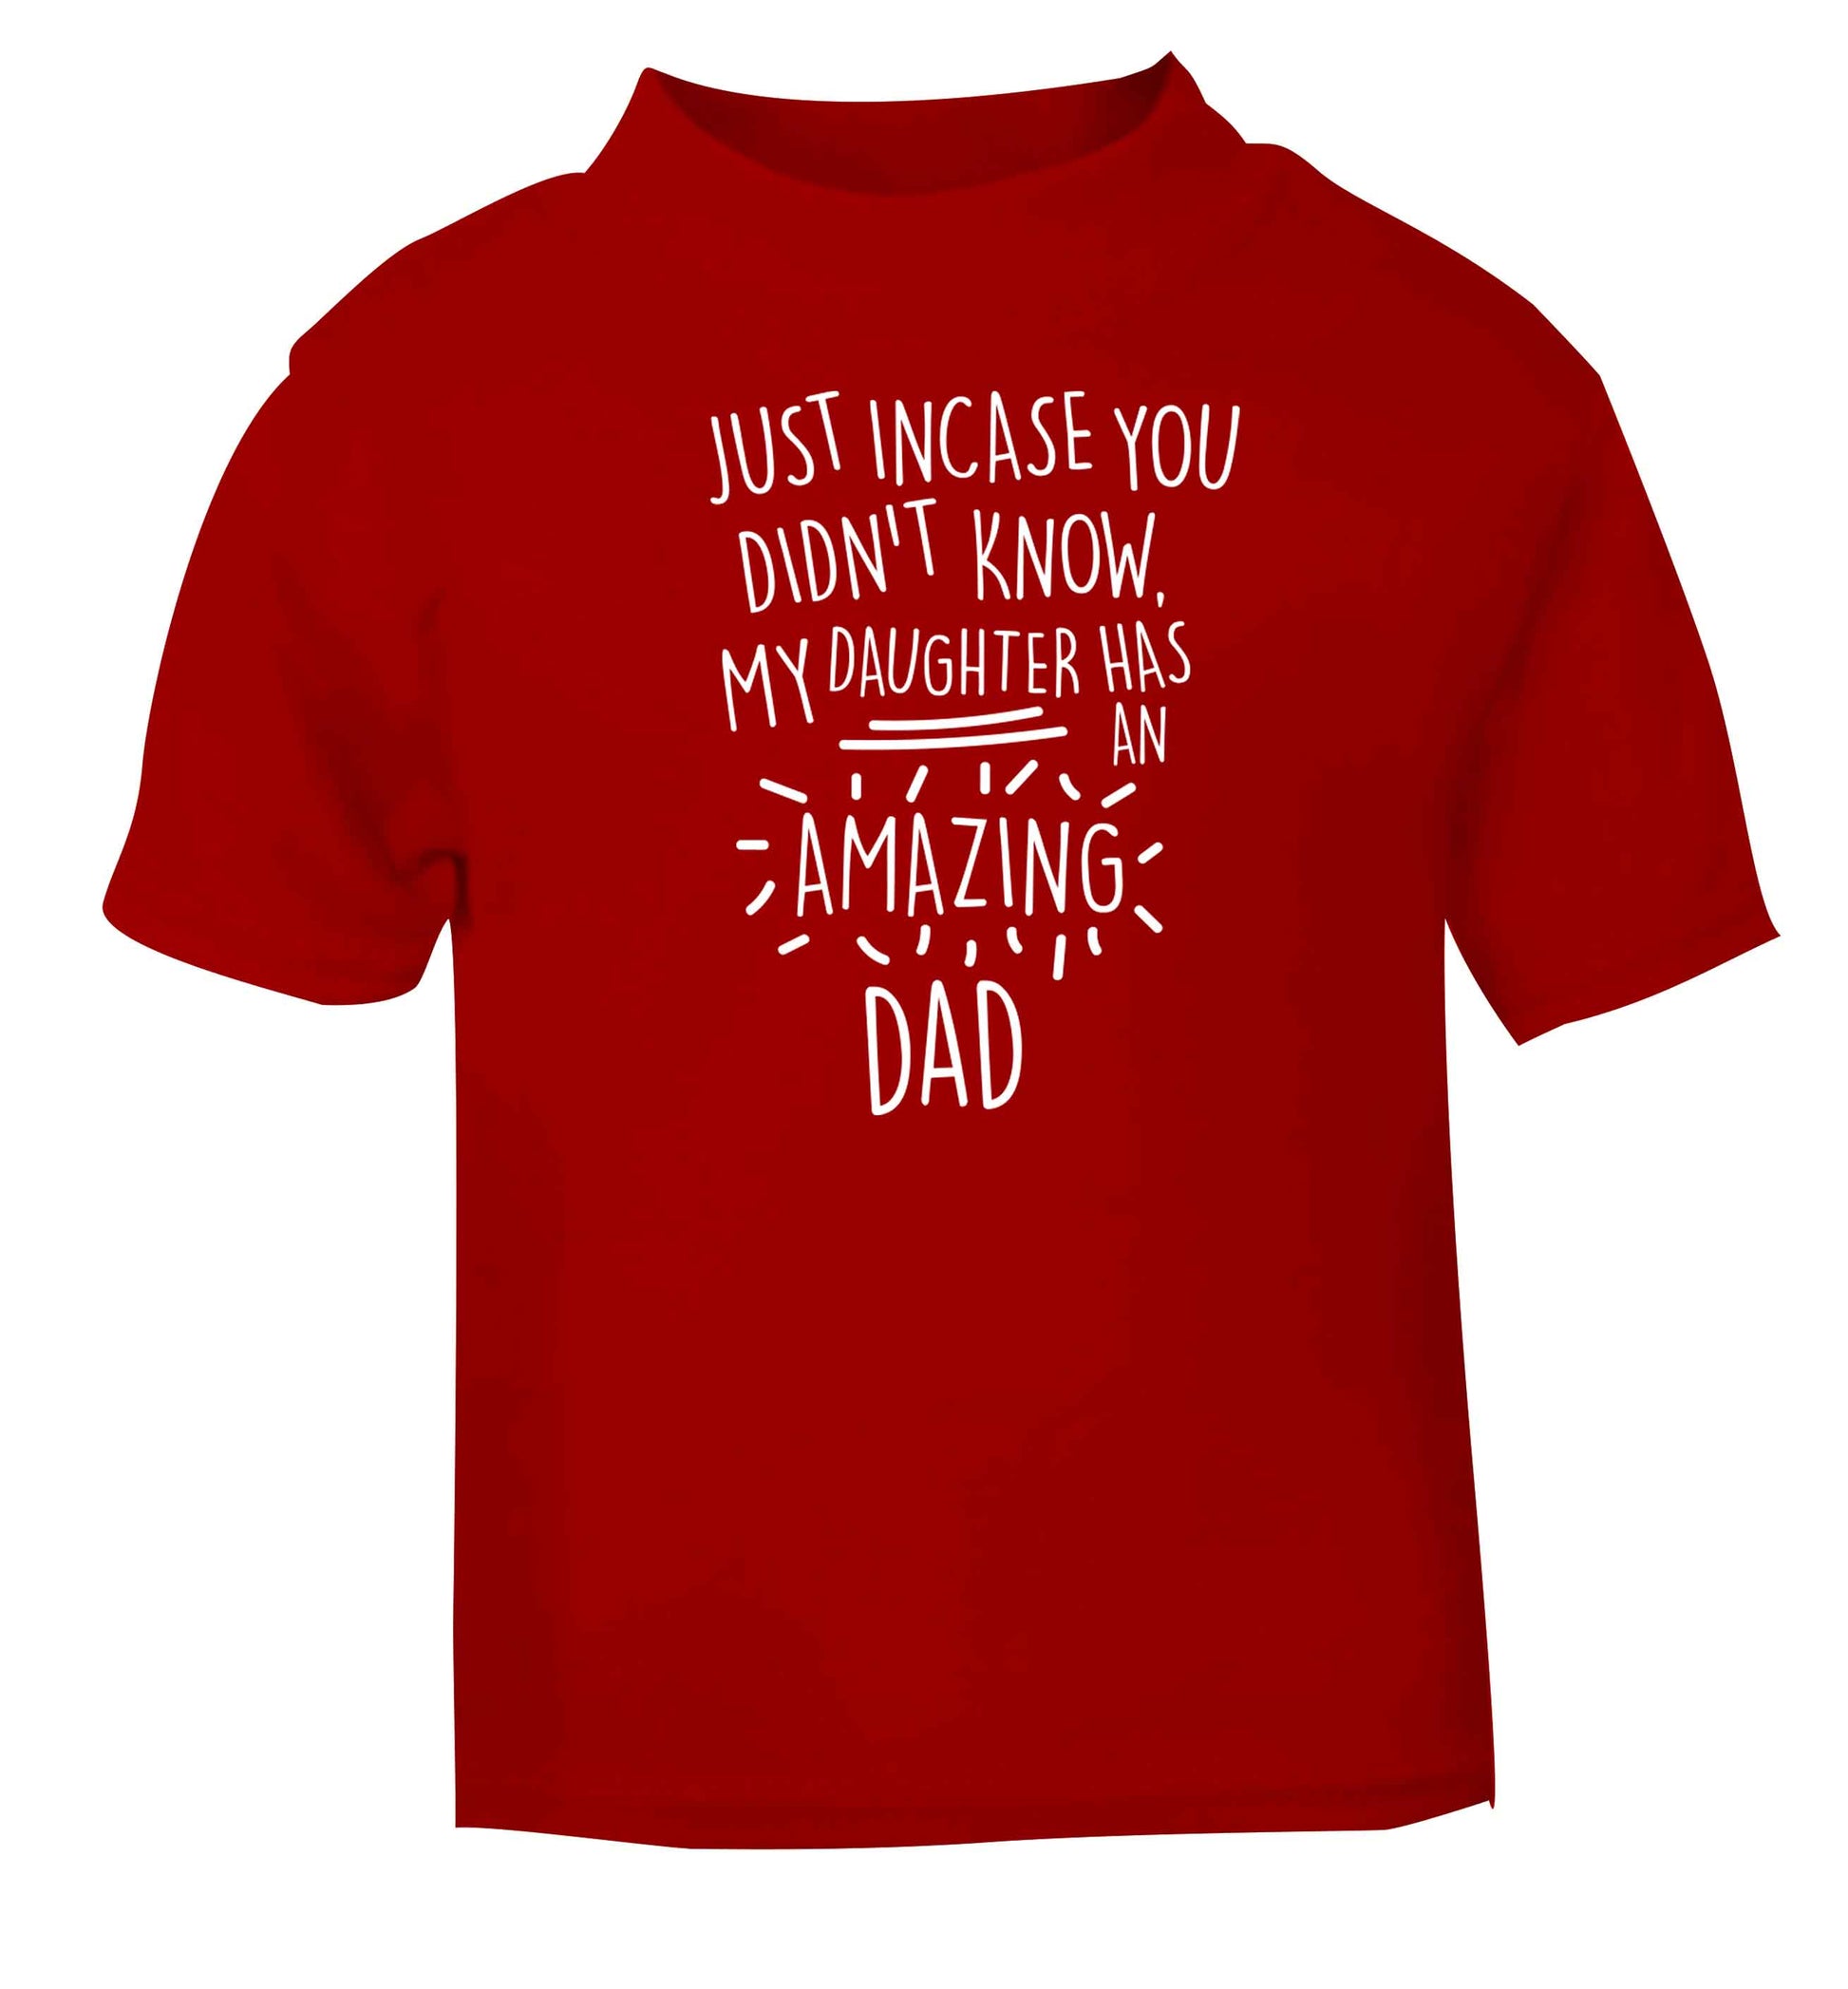 Just incase you didn't know my daughter has an amazing dad red baby toddler Tshirt 2 Years